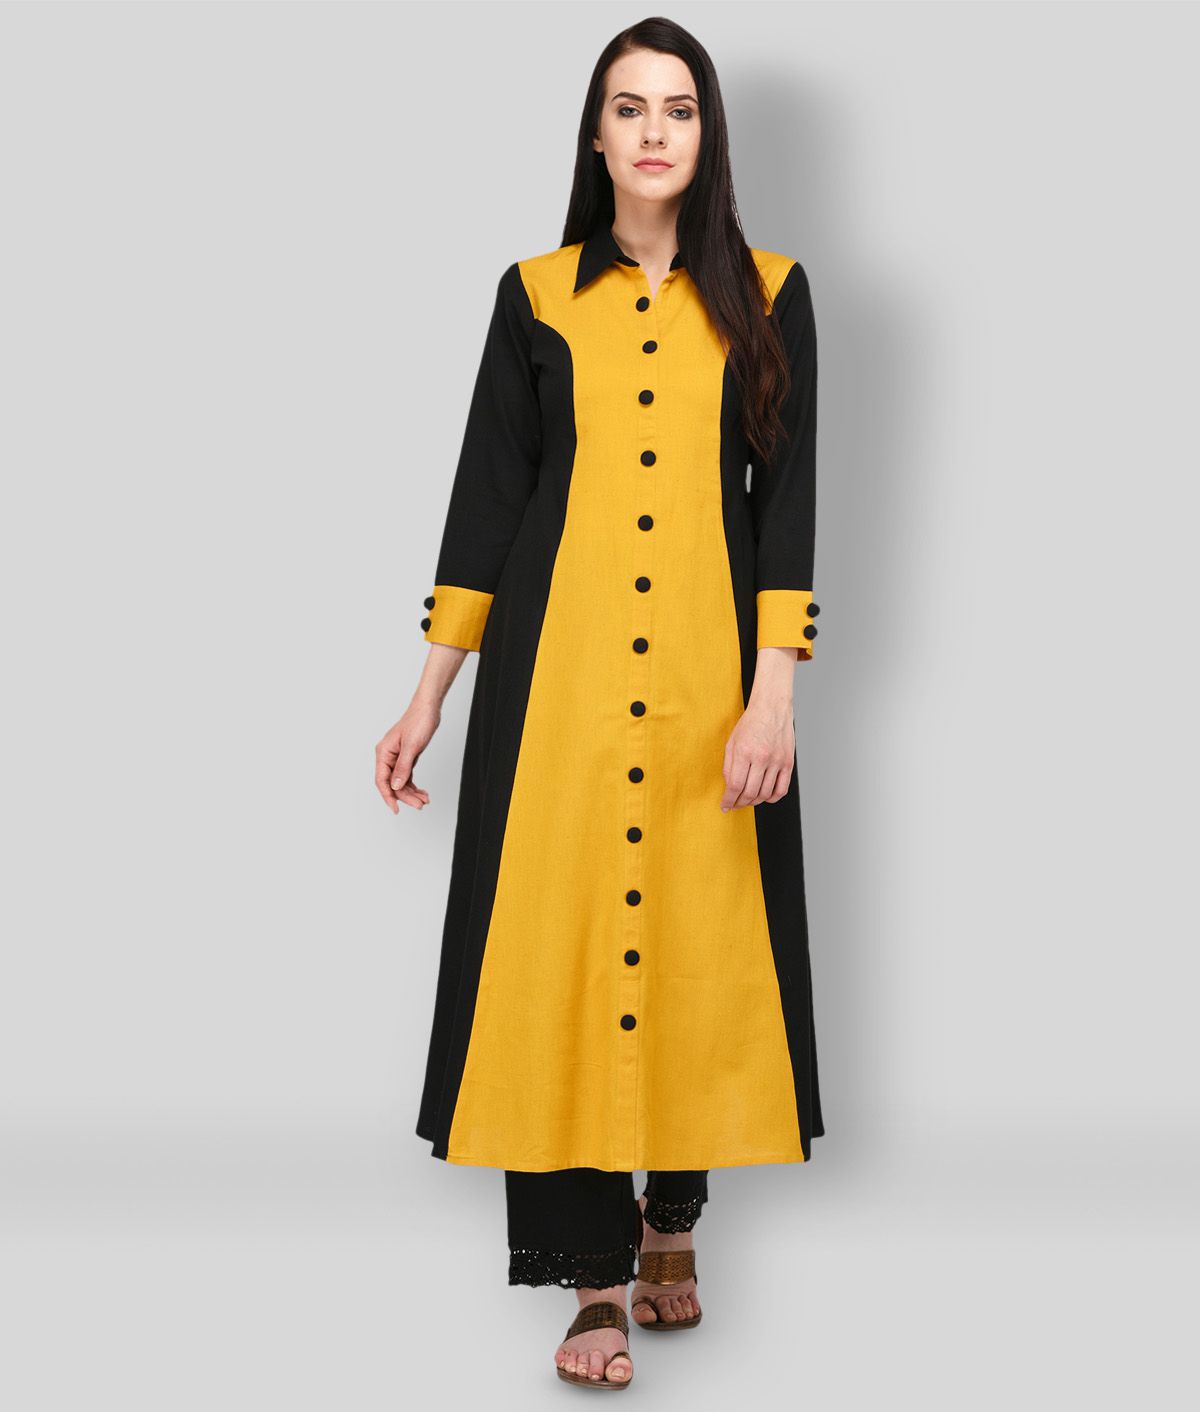     			Pistaa - Multicolor Cotton Blend Women's Flared Kurti ( Pack of 1 )